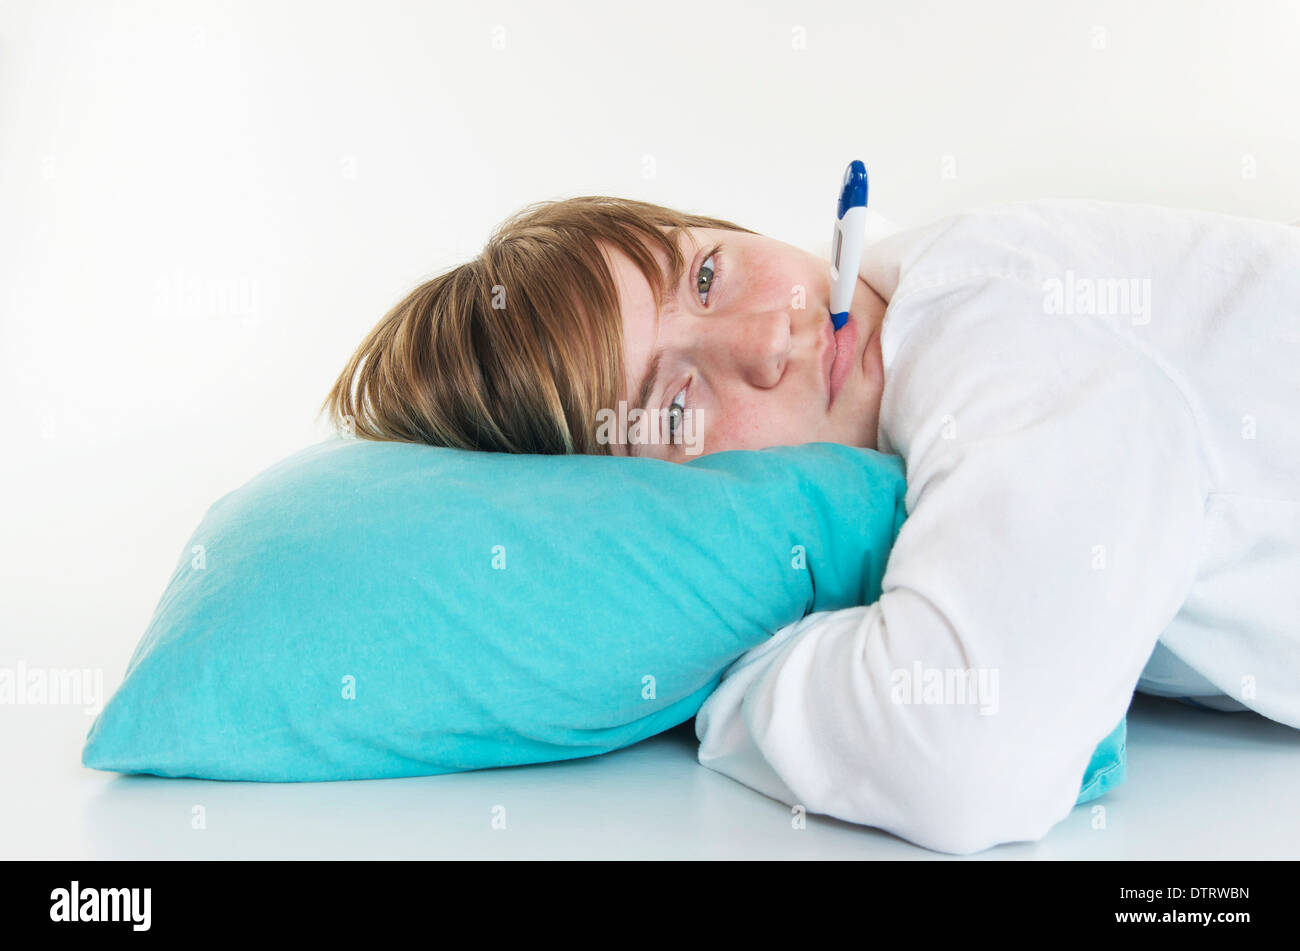 Sick young girl laying on pillow with thermometer in her mouth. Stock Photo